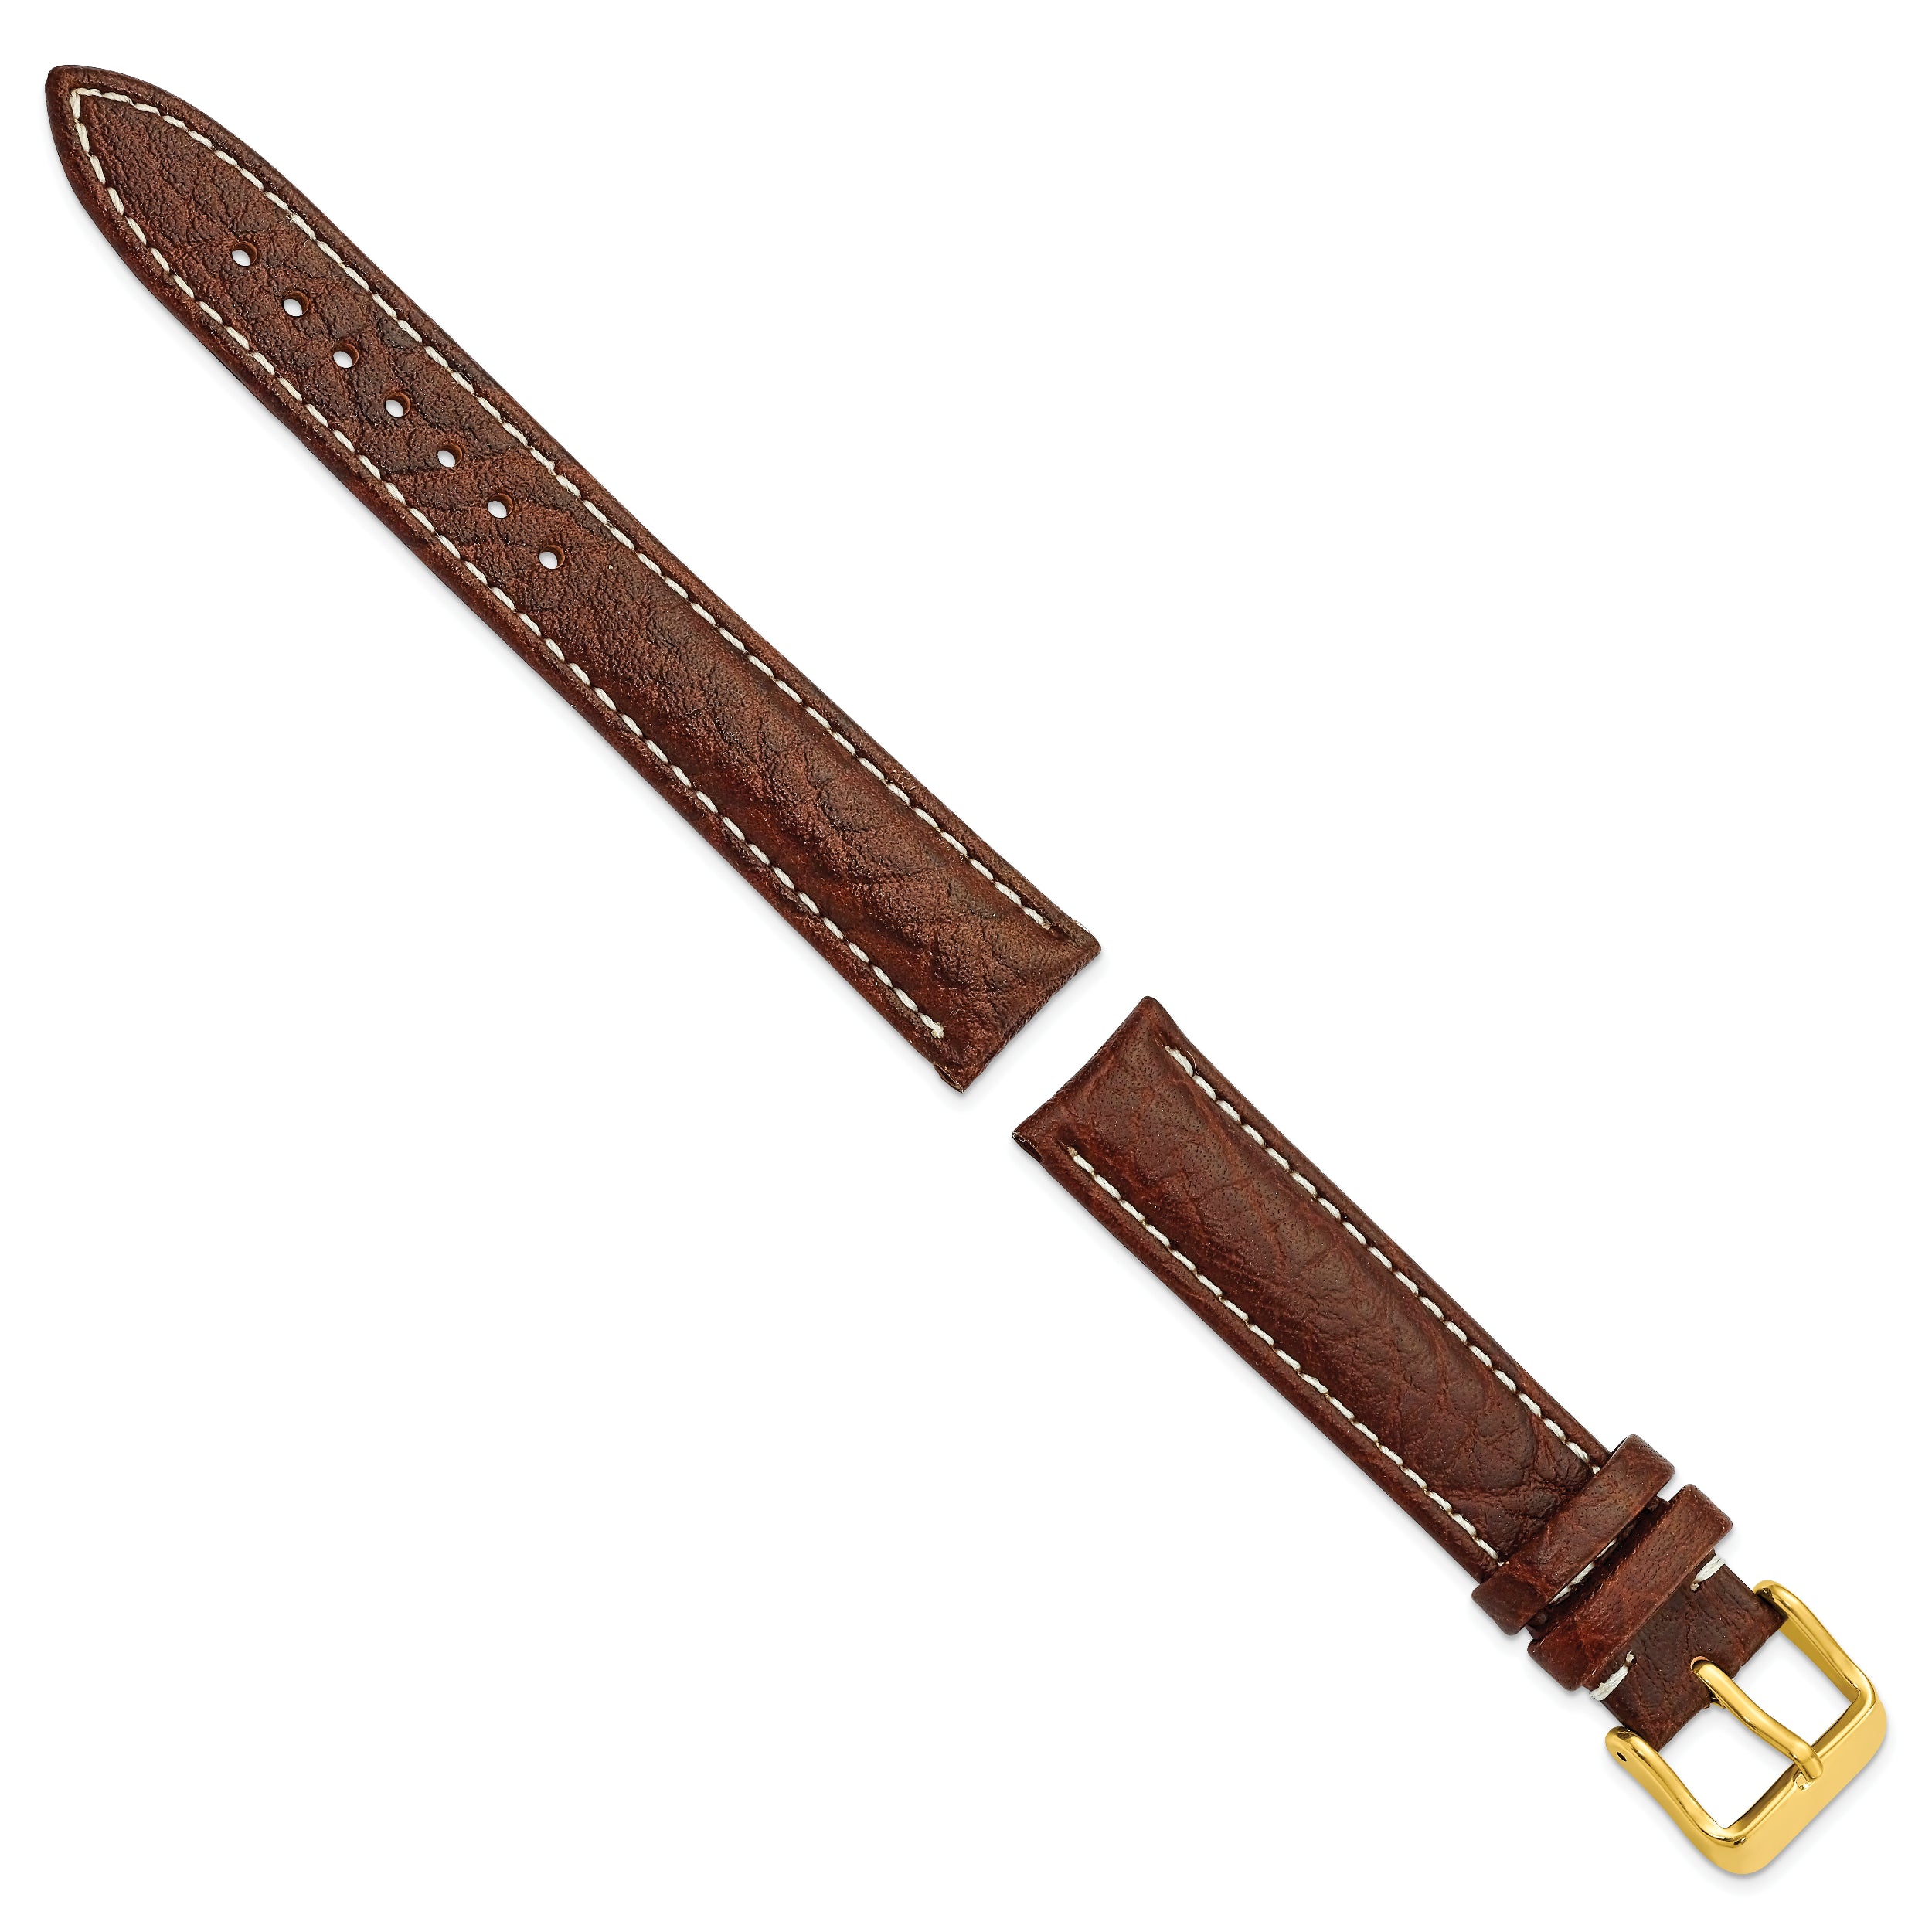 12mm Dark Brown Sport Leather with White Stitching and Gold-tone Buckle 6.75 inch Watch Band